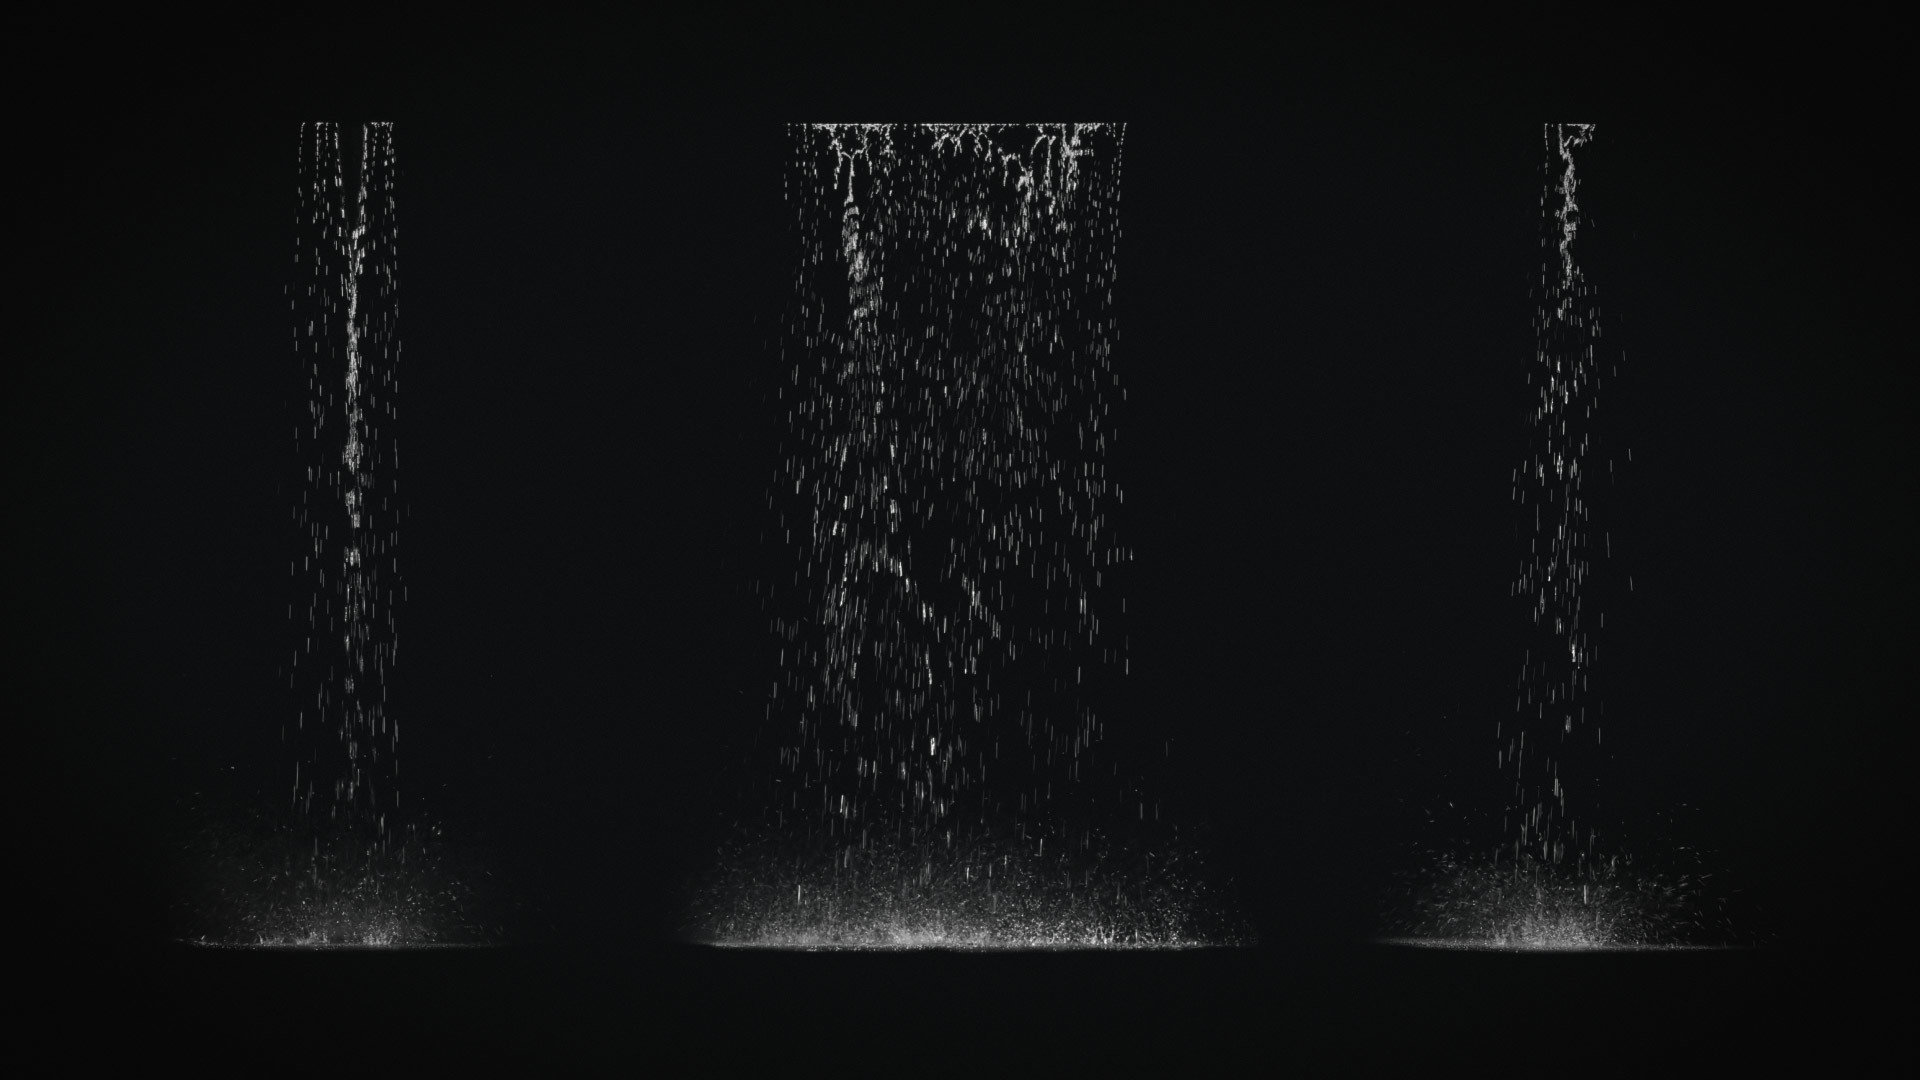 Dripping Water Assets 2K-PRORES[Actionvfx]